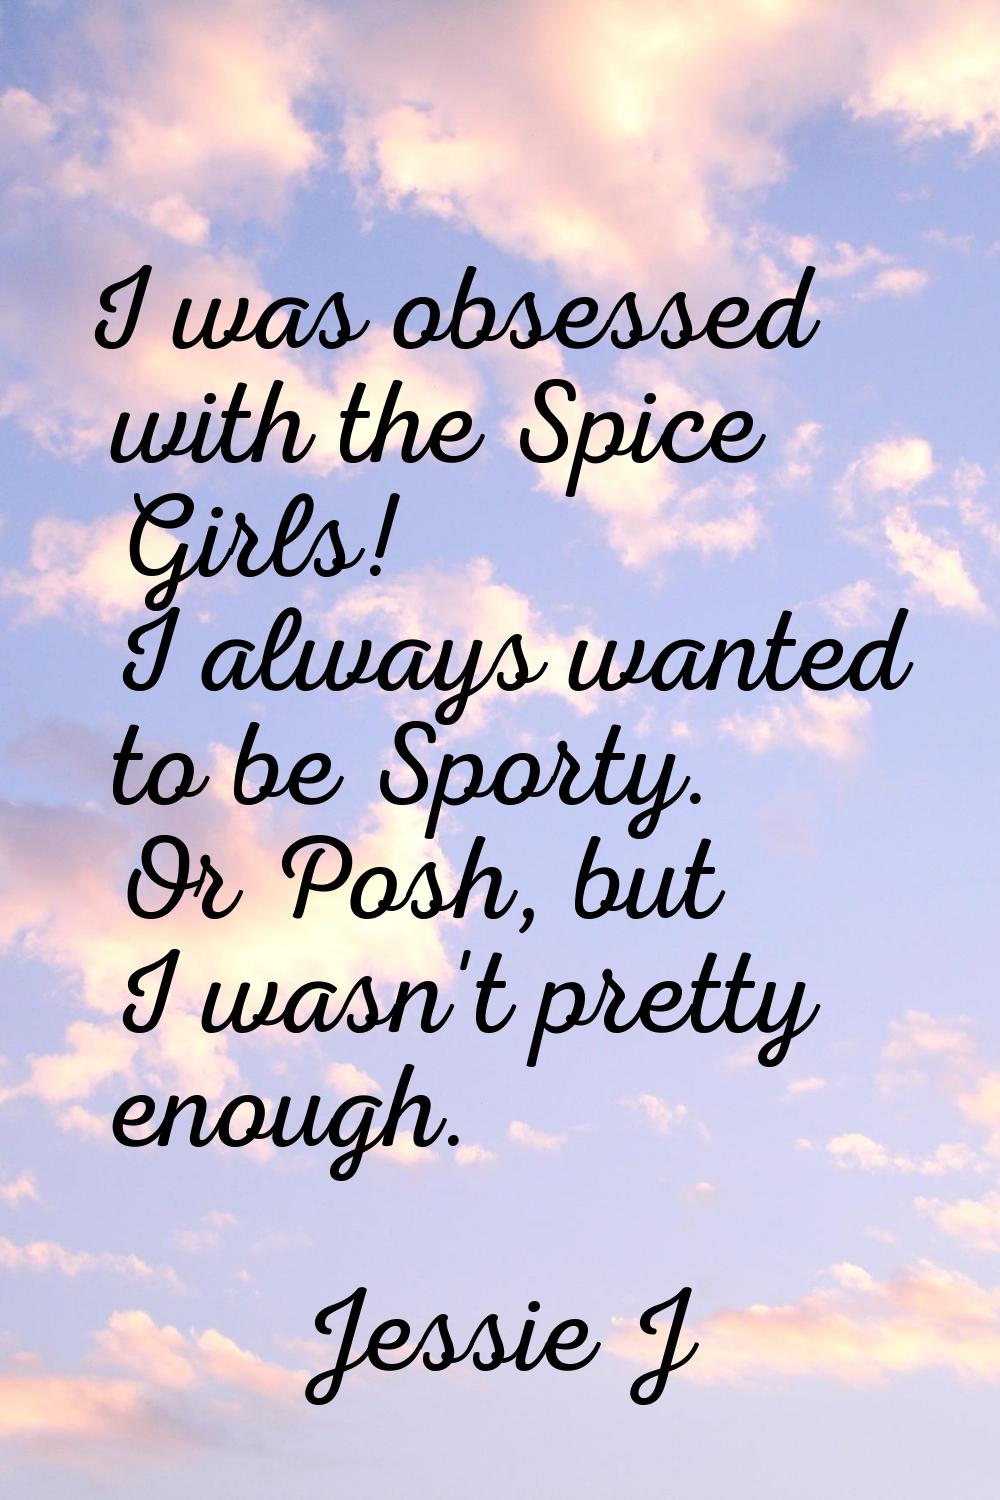 I was obsessed with the Spice Girls! I always wanted to be Sporty. Or Posh, but I wasn't pretty eno